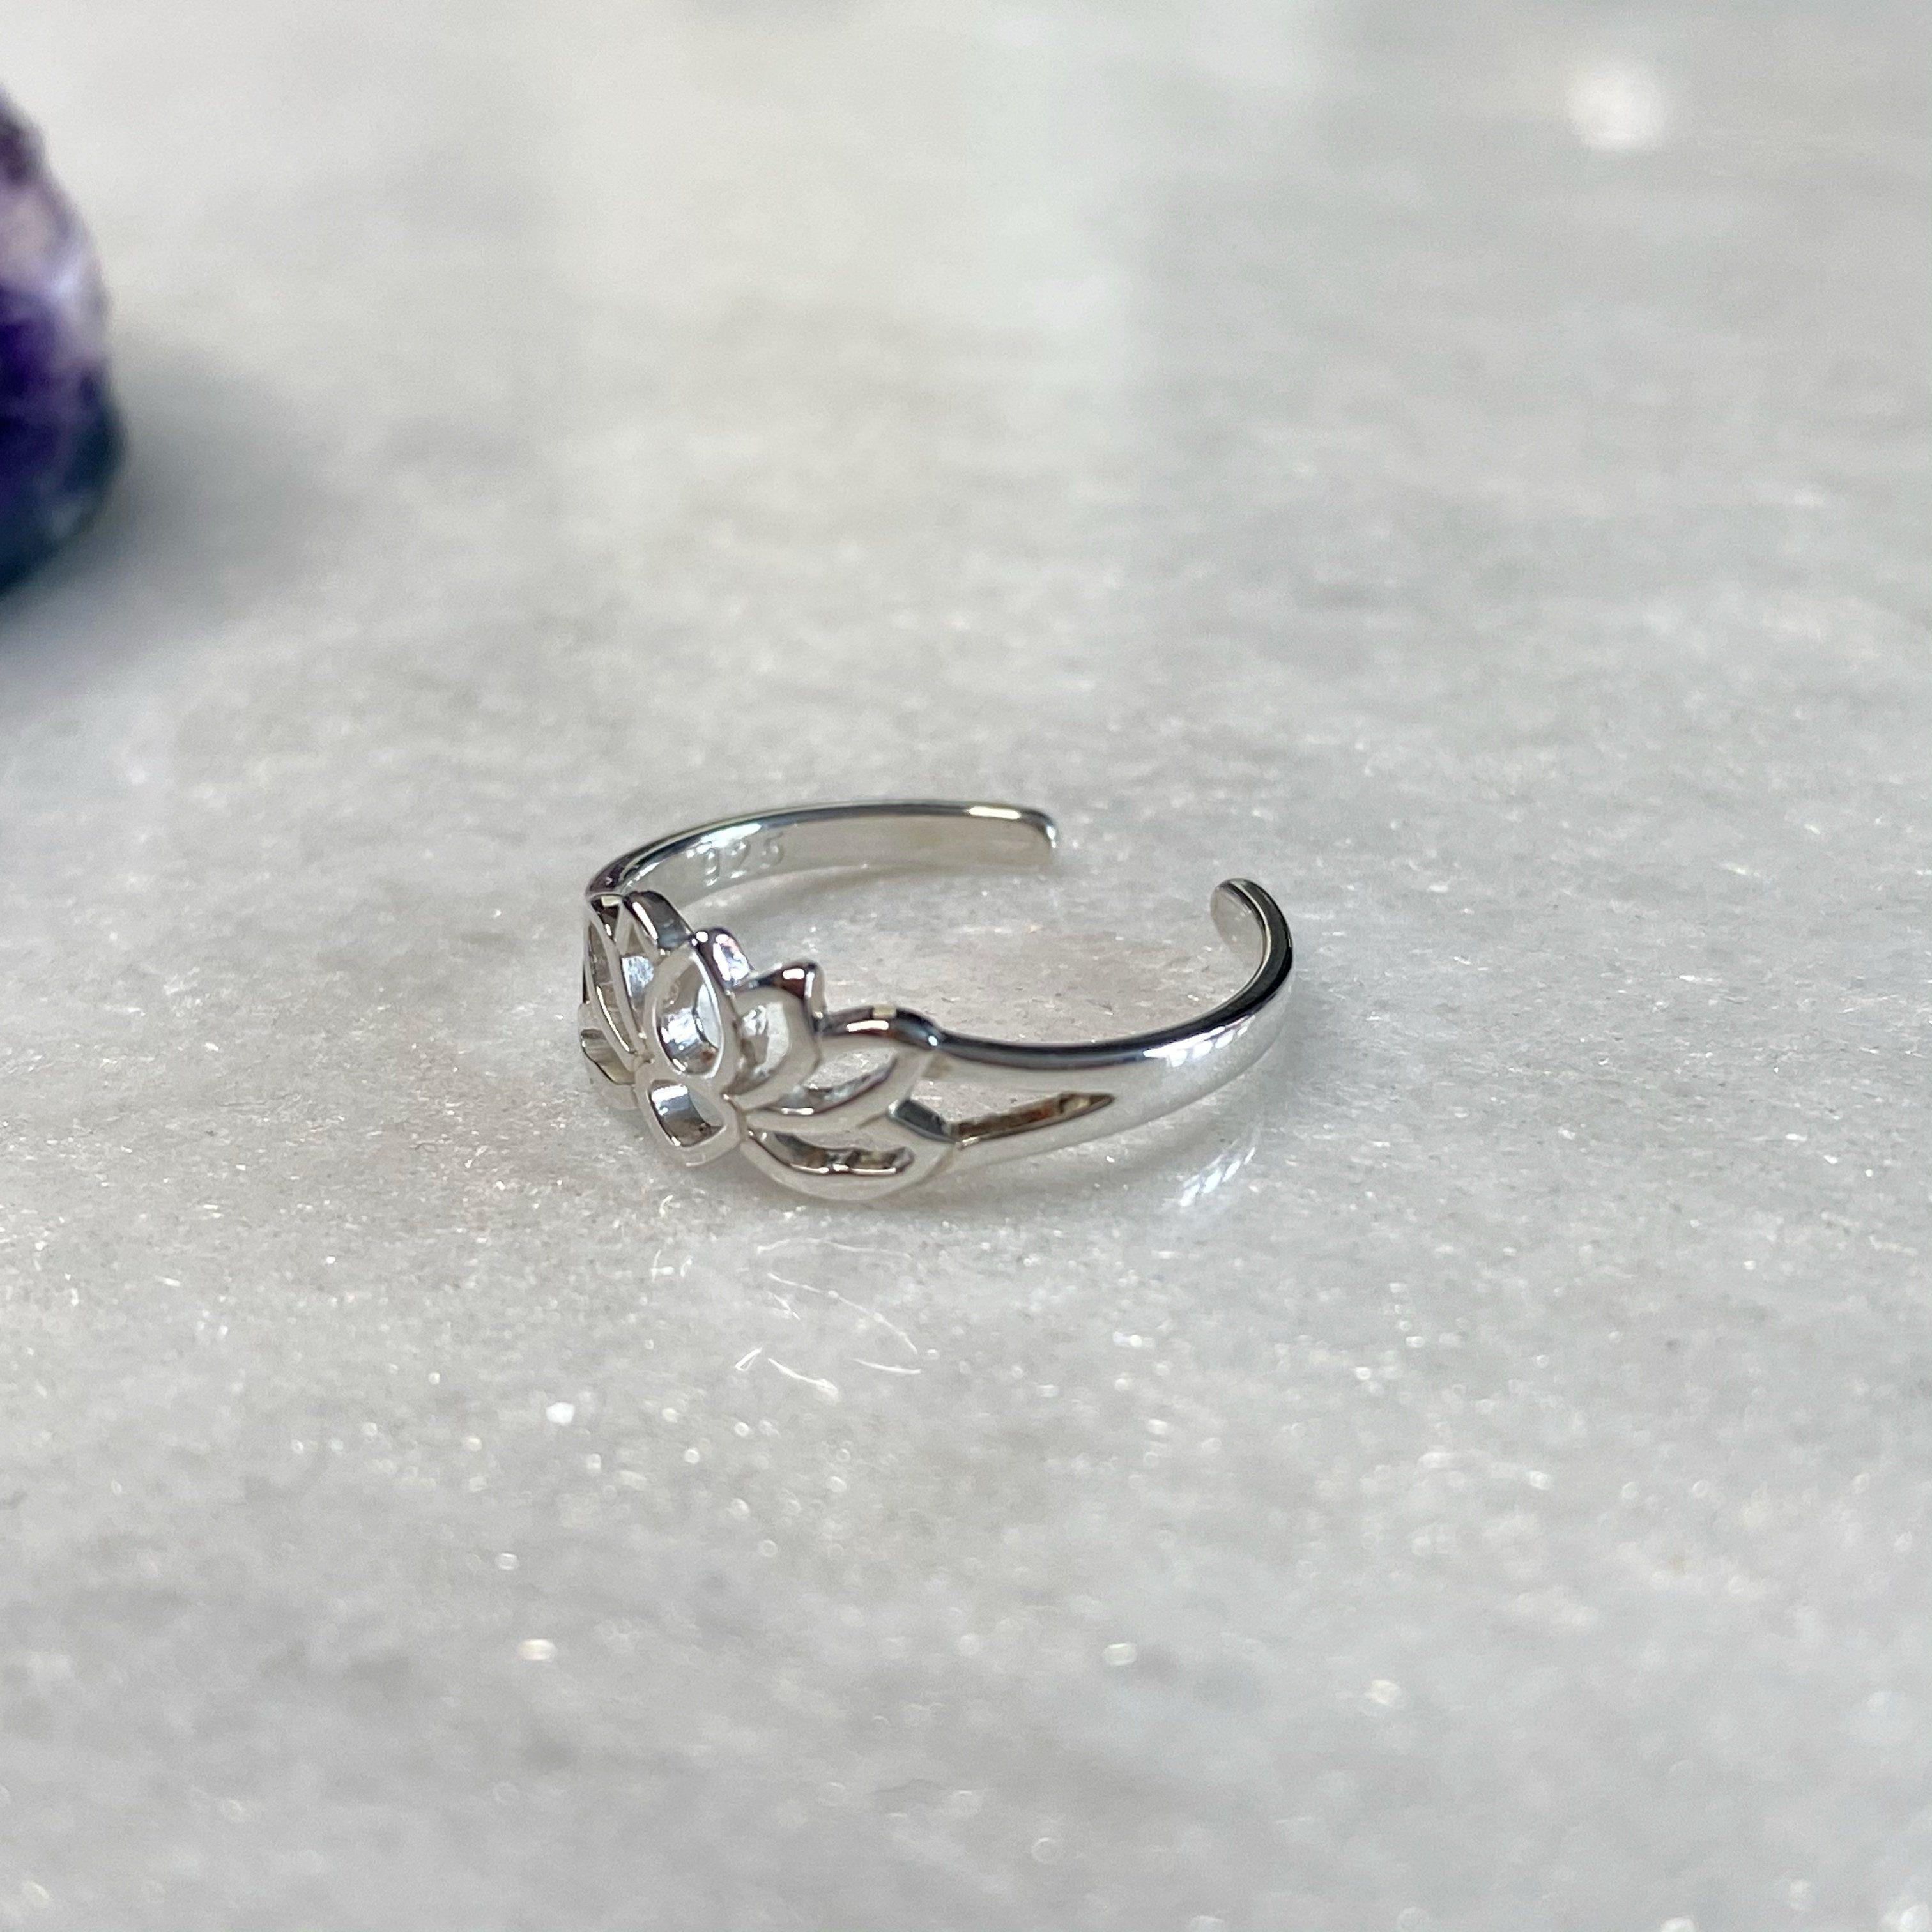 Toe Ring, Recycled Sterling Silver Lotus Tiara. - Etsy | Toe rings,  Recycled sterling silver, Unique silver jewelry